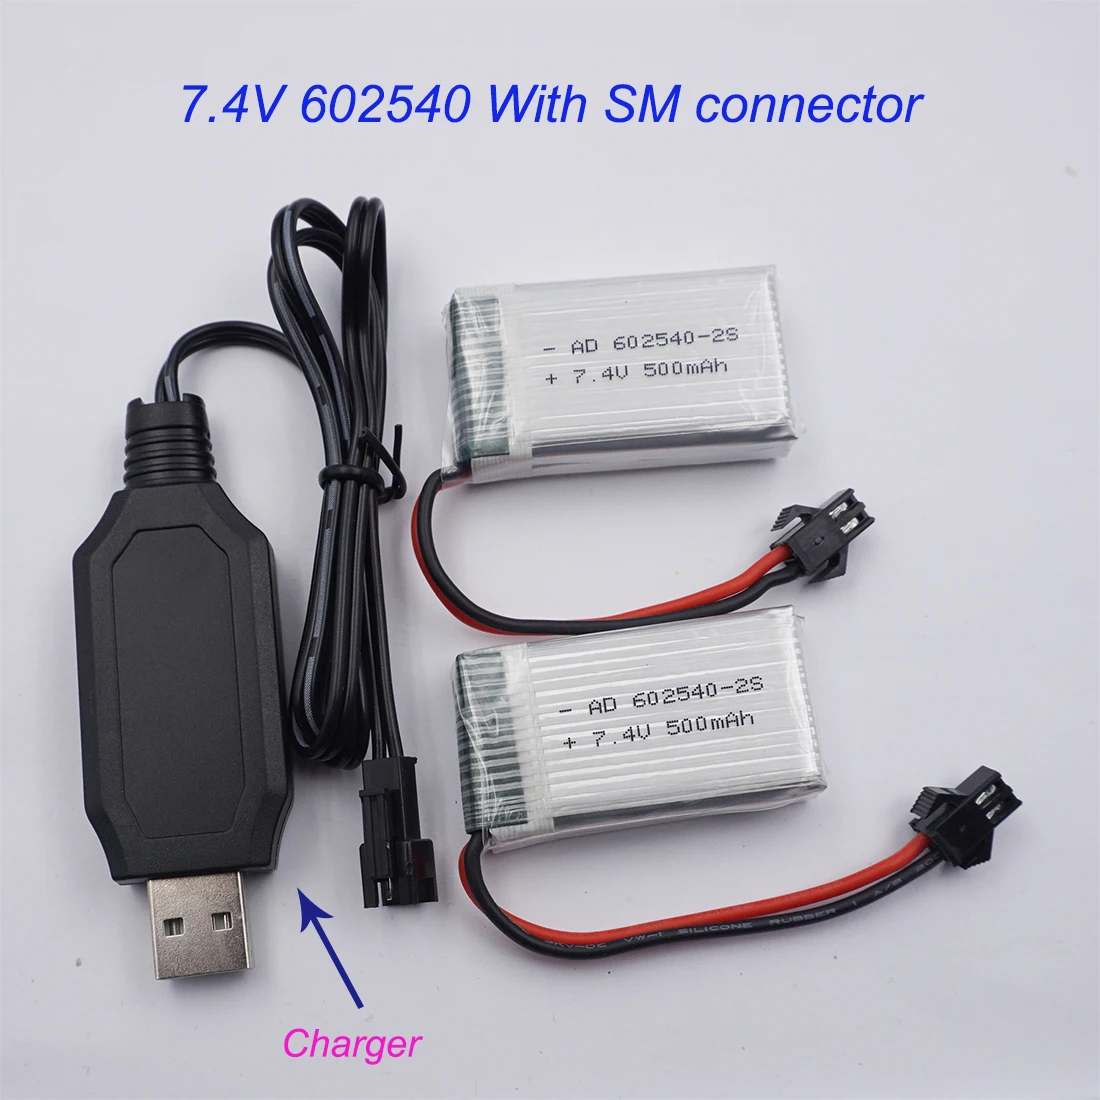 

2pcs 7.4V 500mAh 3.7Wh 25C Rechargeable Polymer Li Battery Lipo 602540 SM For Helicopter Models JJRC H11C H11D FPV RC Drone